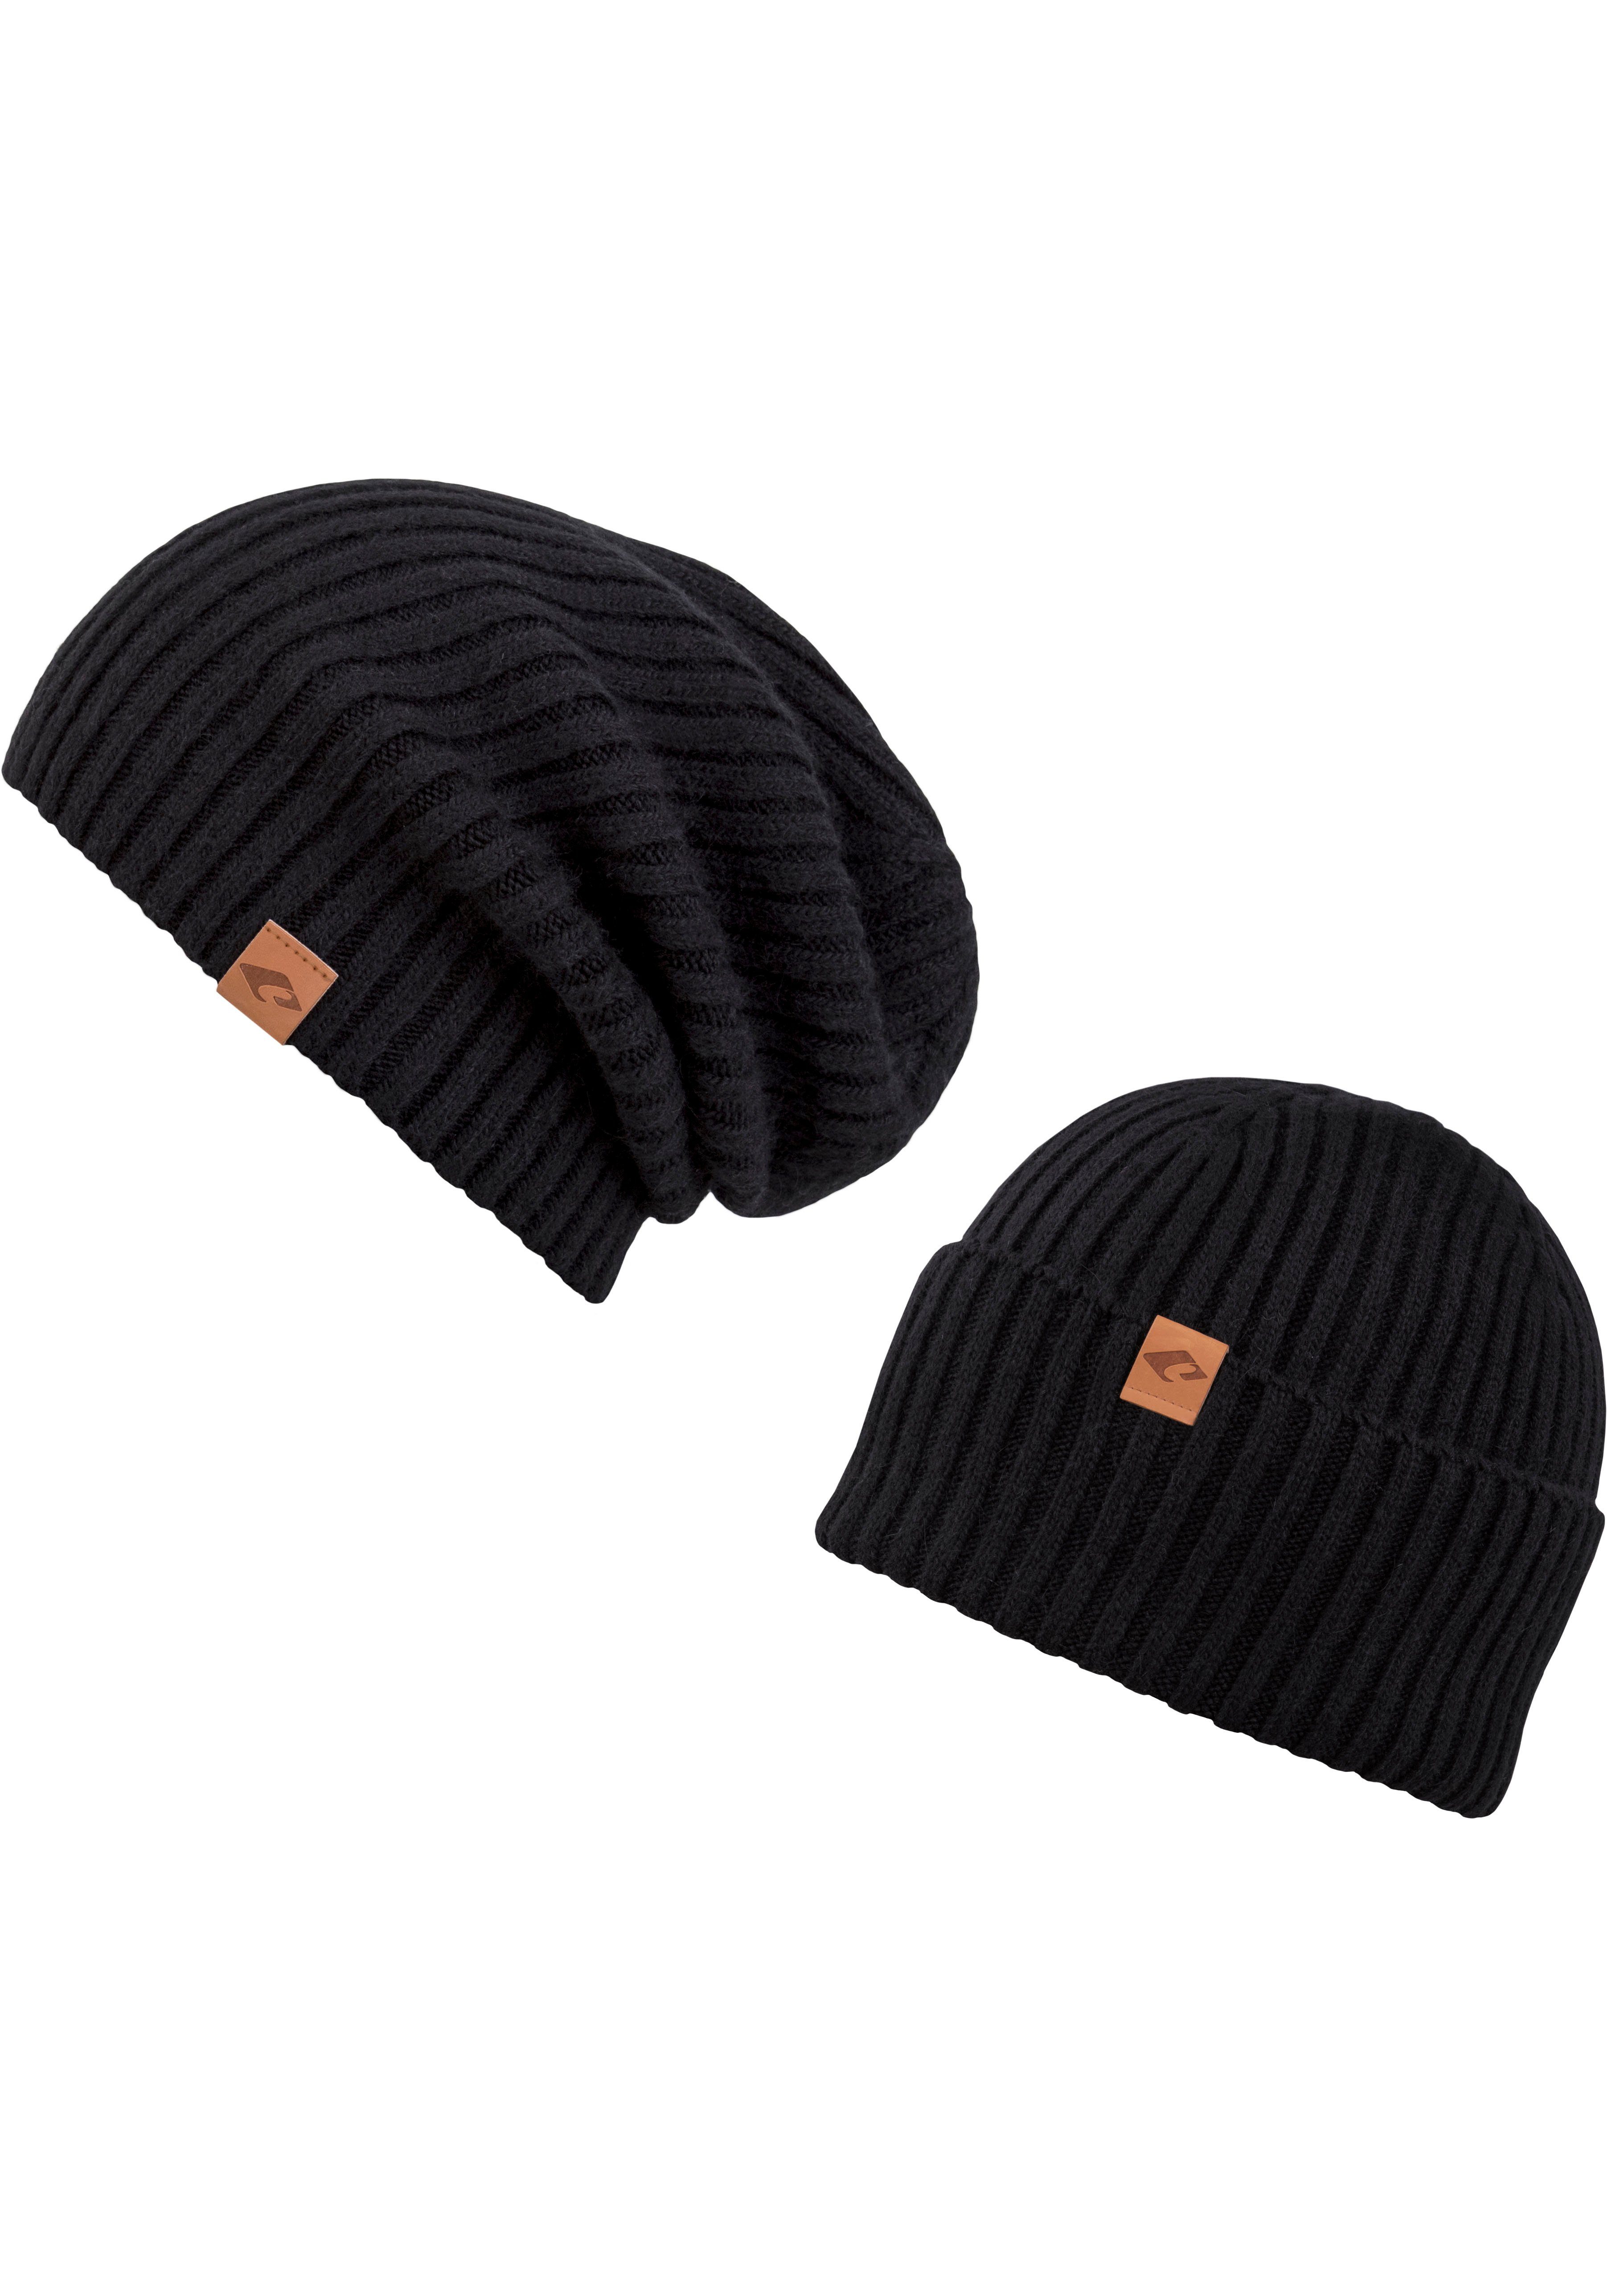 Justin chillouts black Hat Beanie